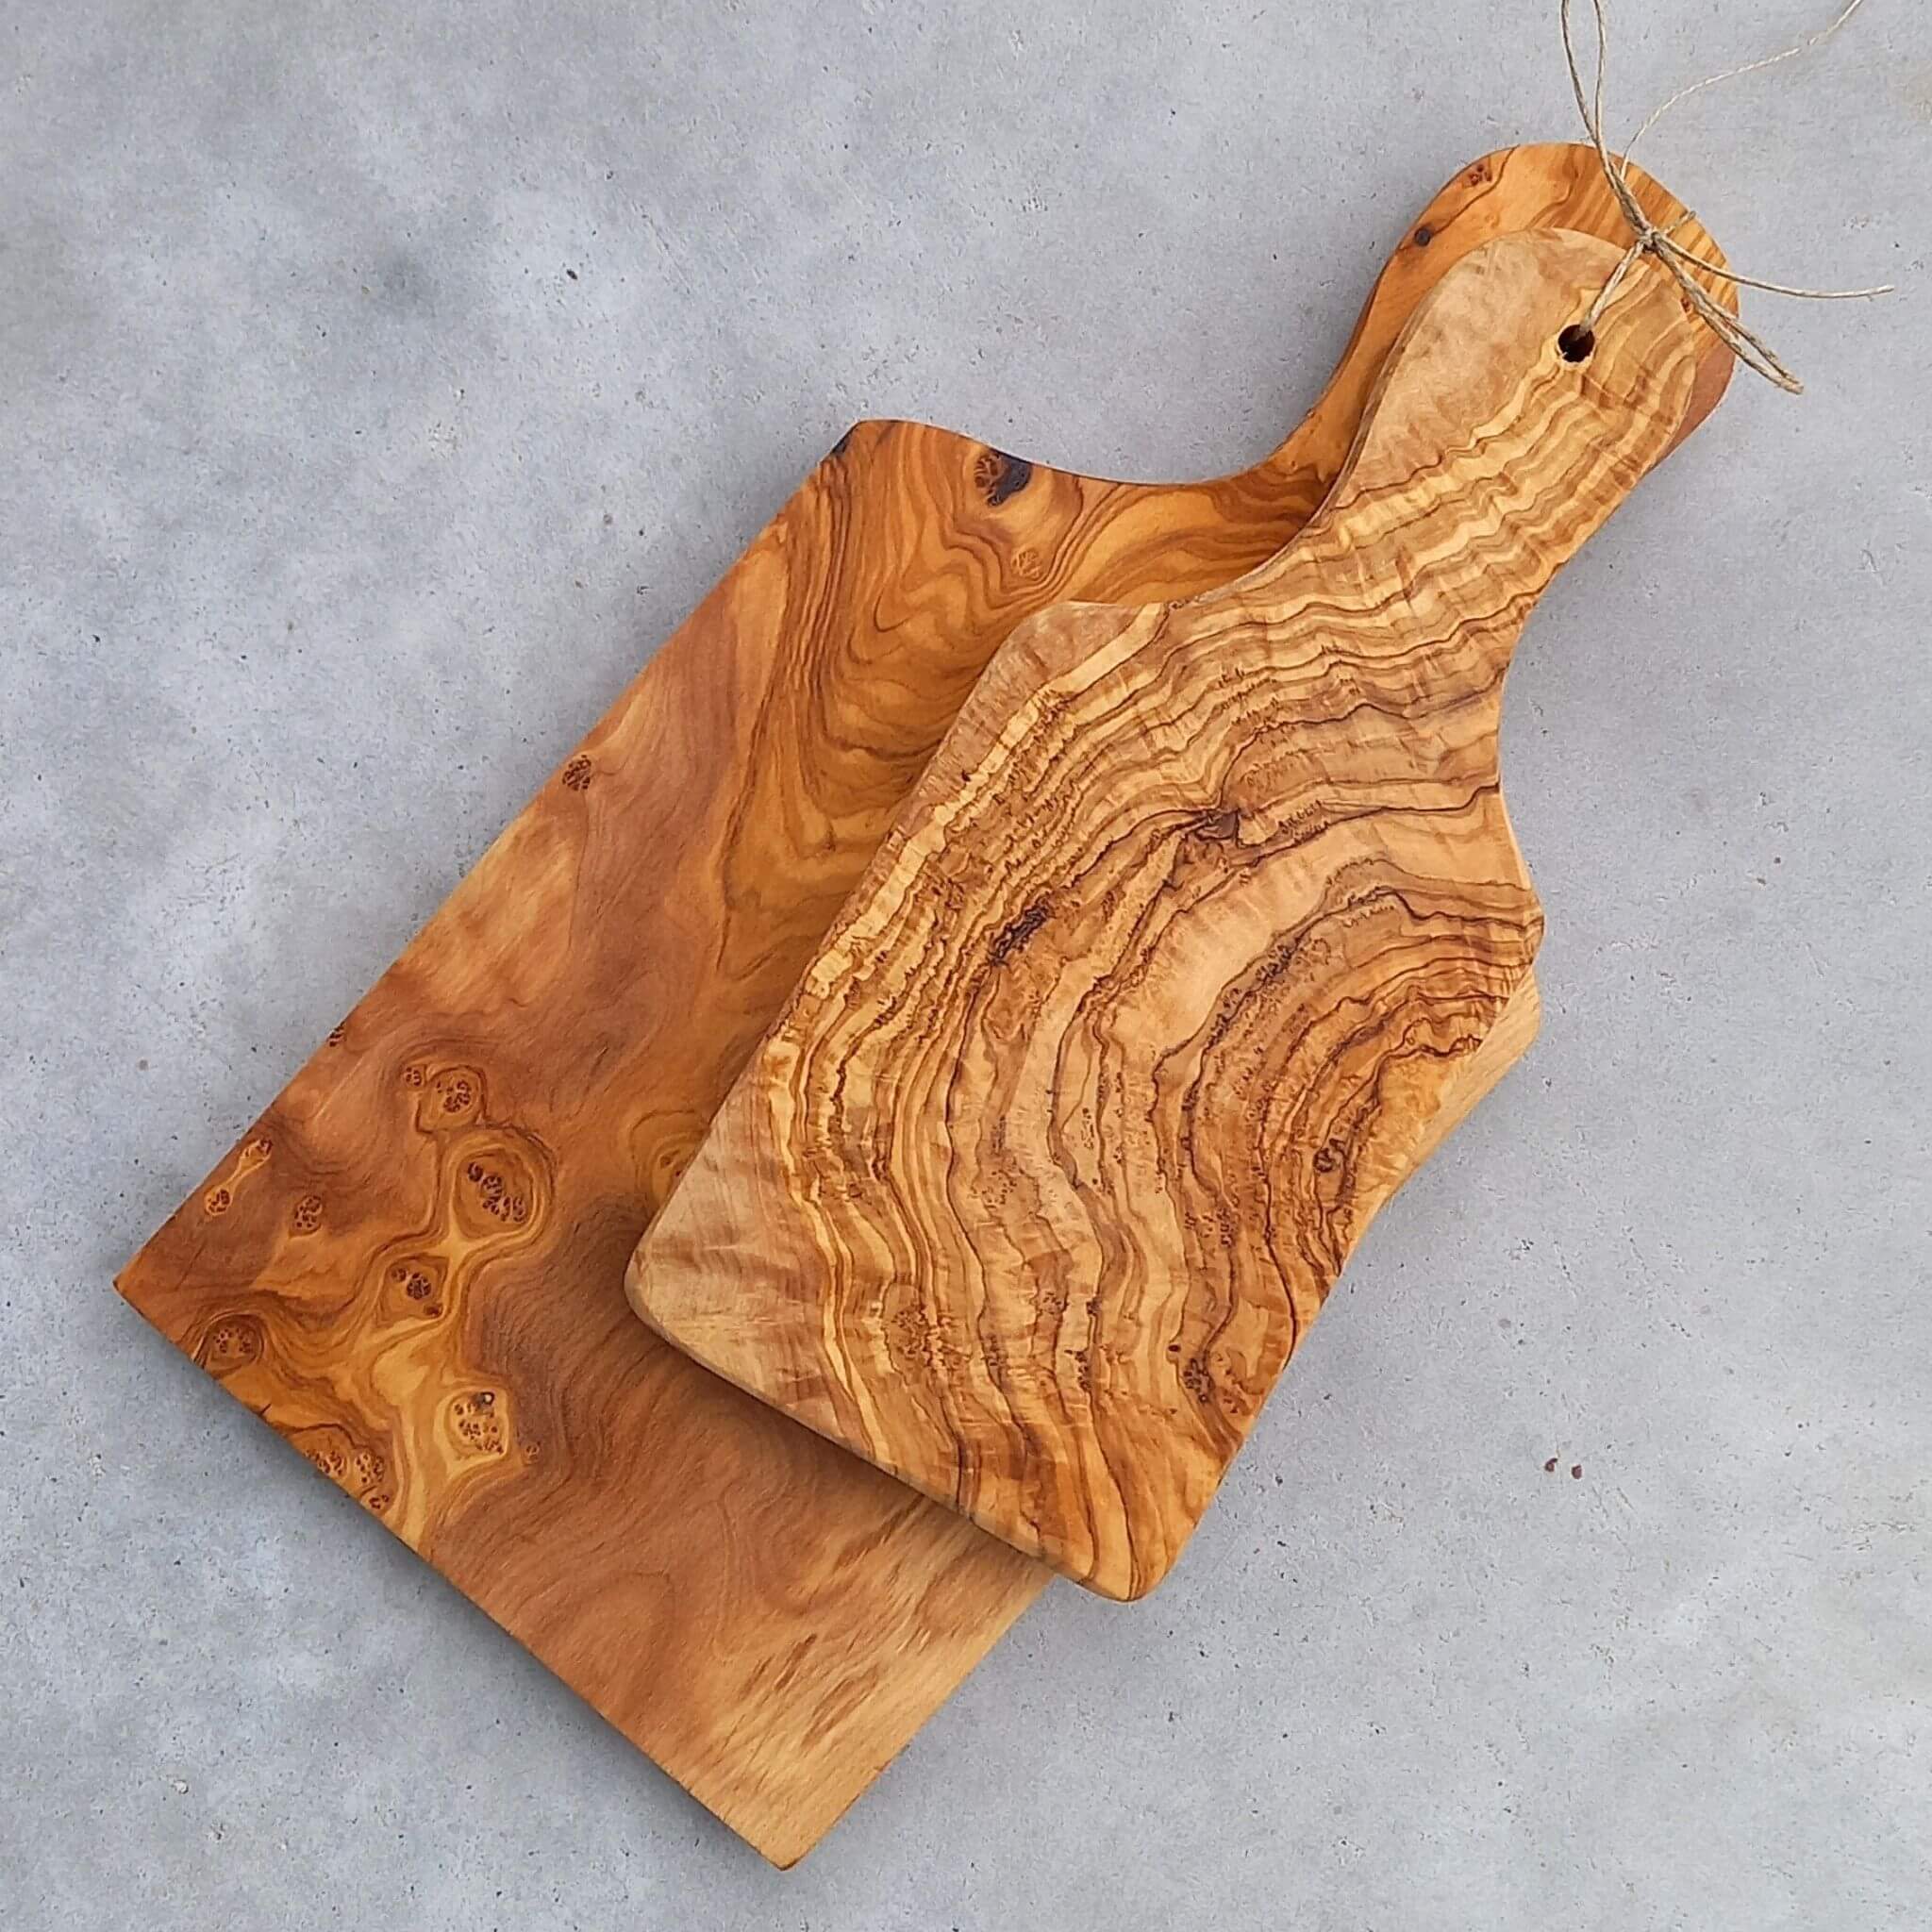 Acacia Wood Cutting Board Large And Small With Handle Long Wooden